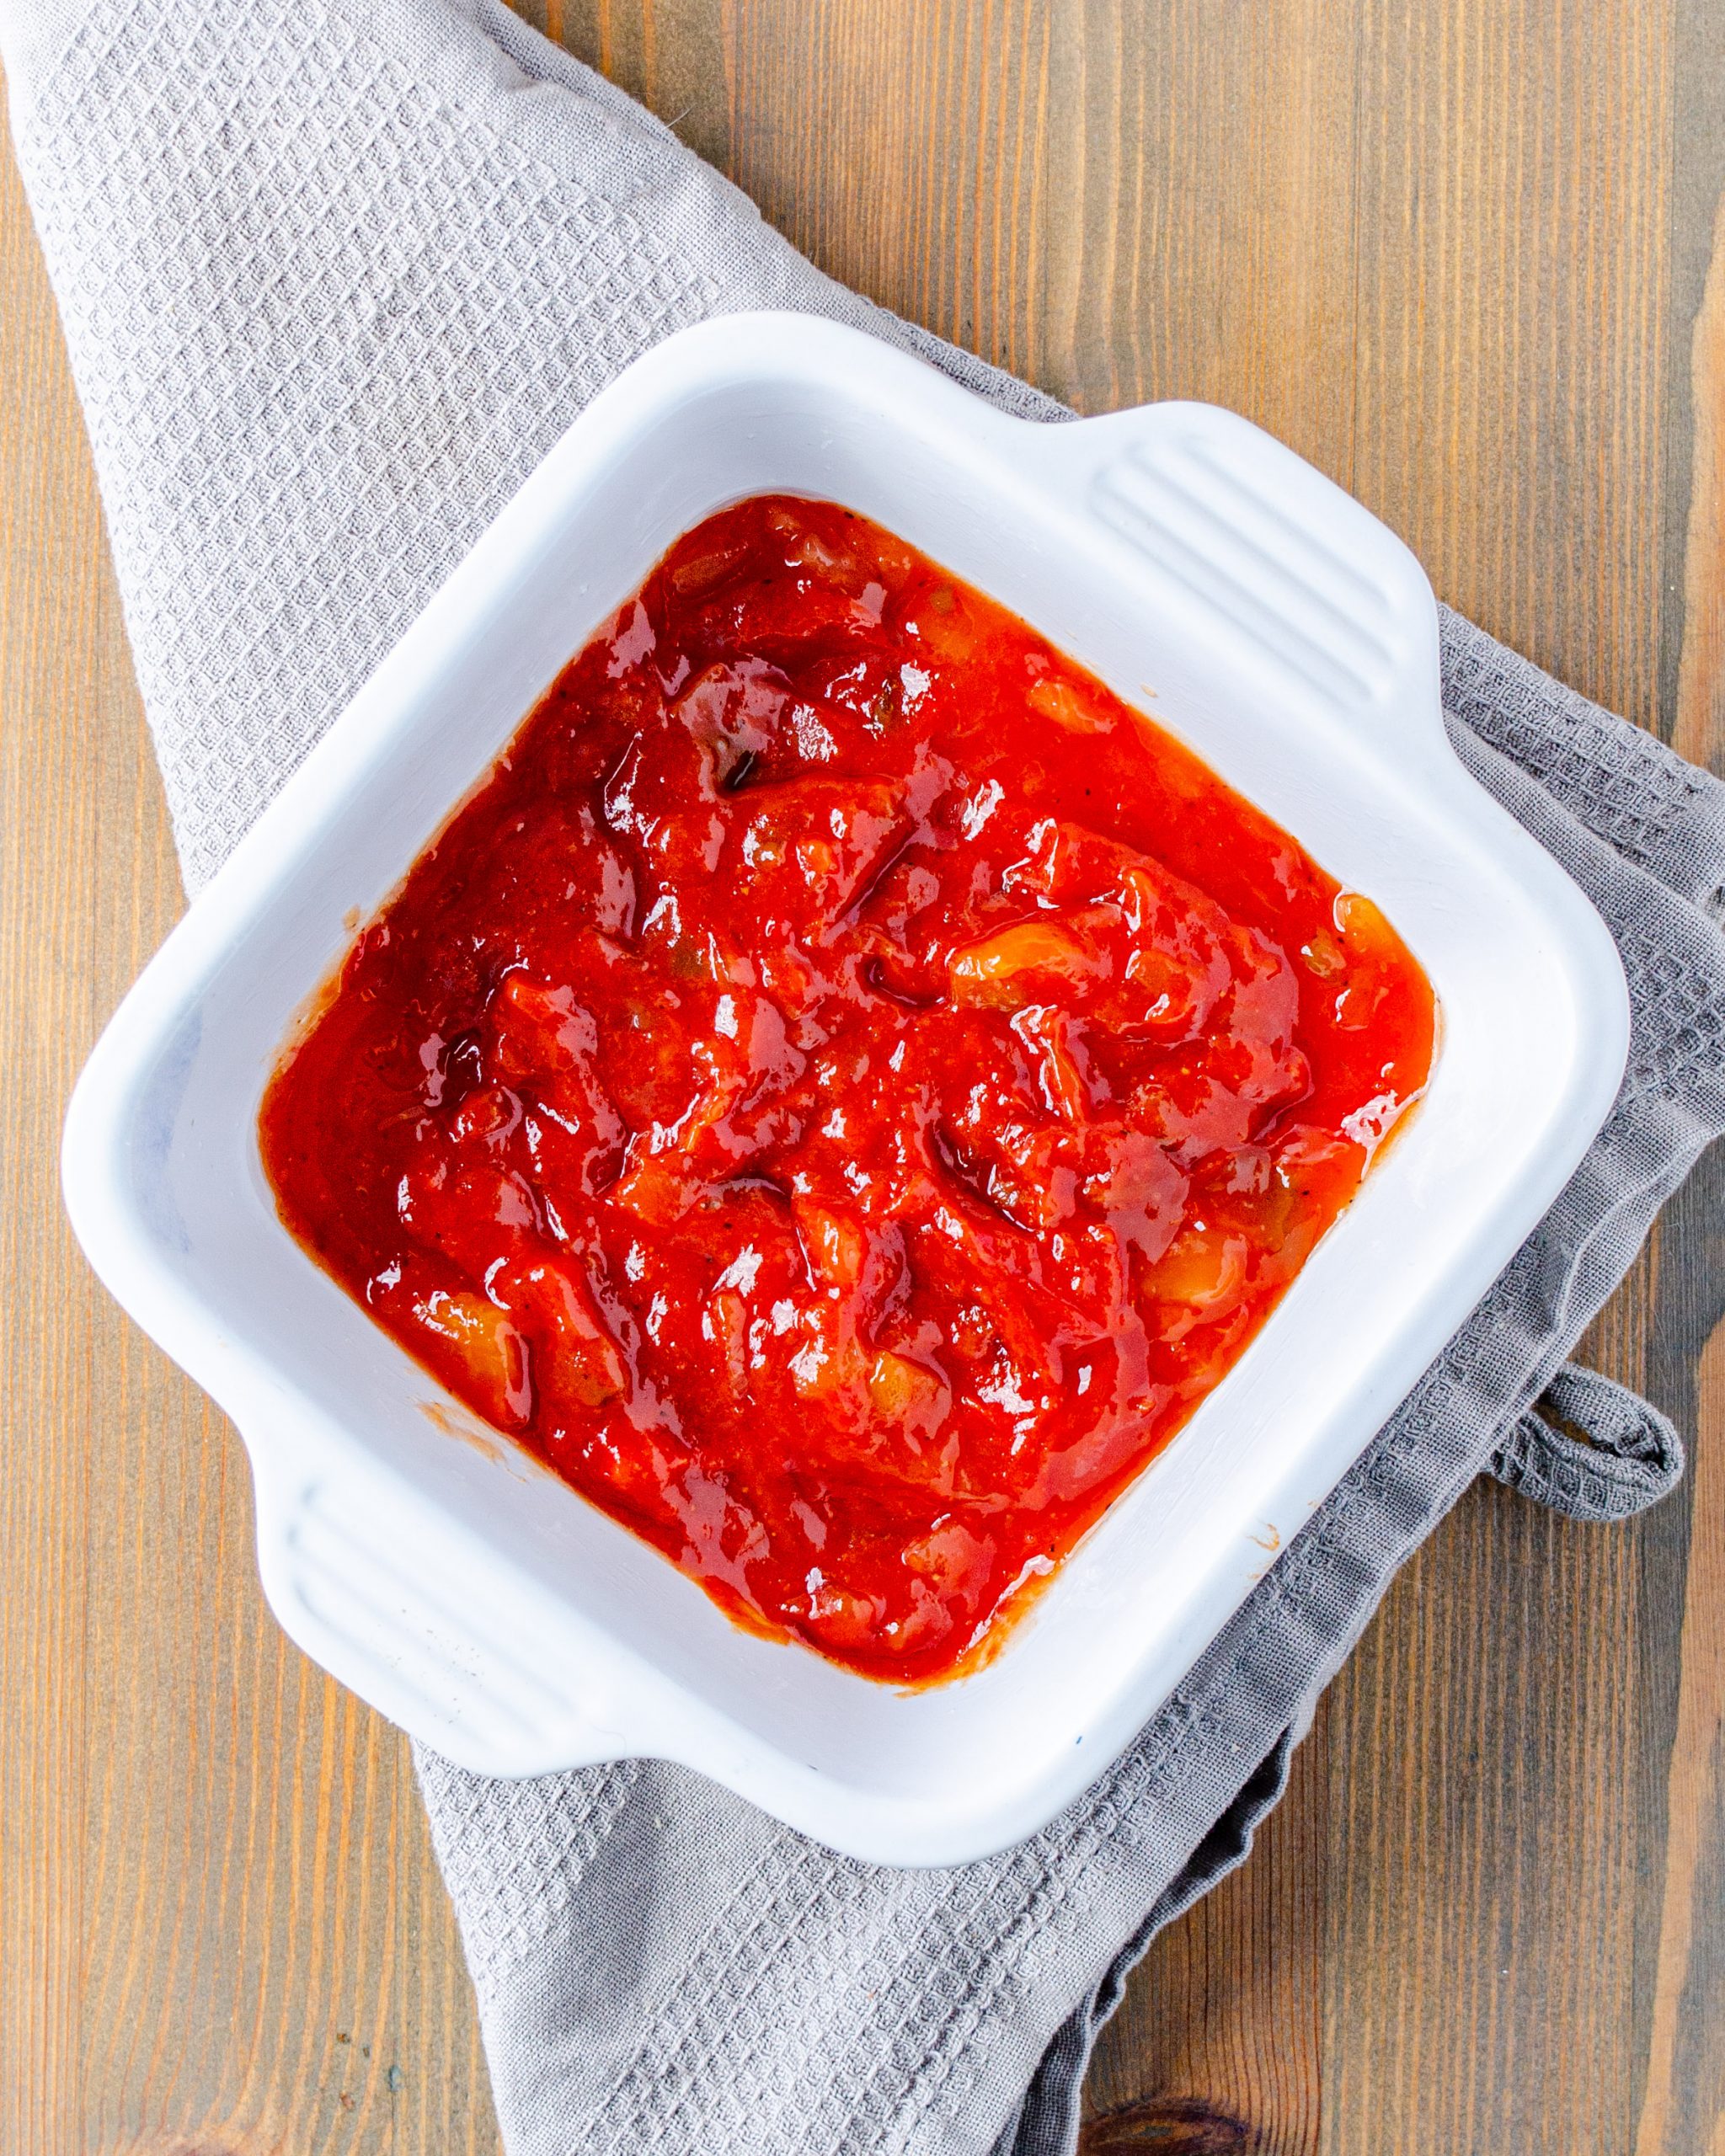 Place the chili sauce into a microwave-safe bowl and cook until hot. Place the sauce into an even layer on the bottom of a 9x9 baking dish.